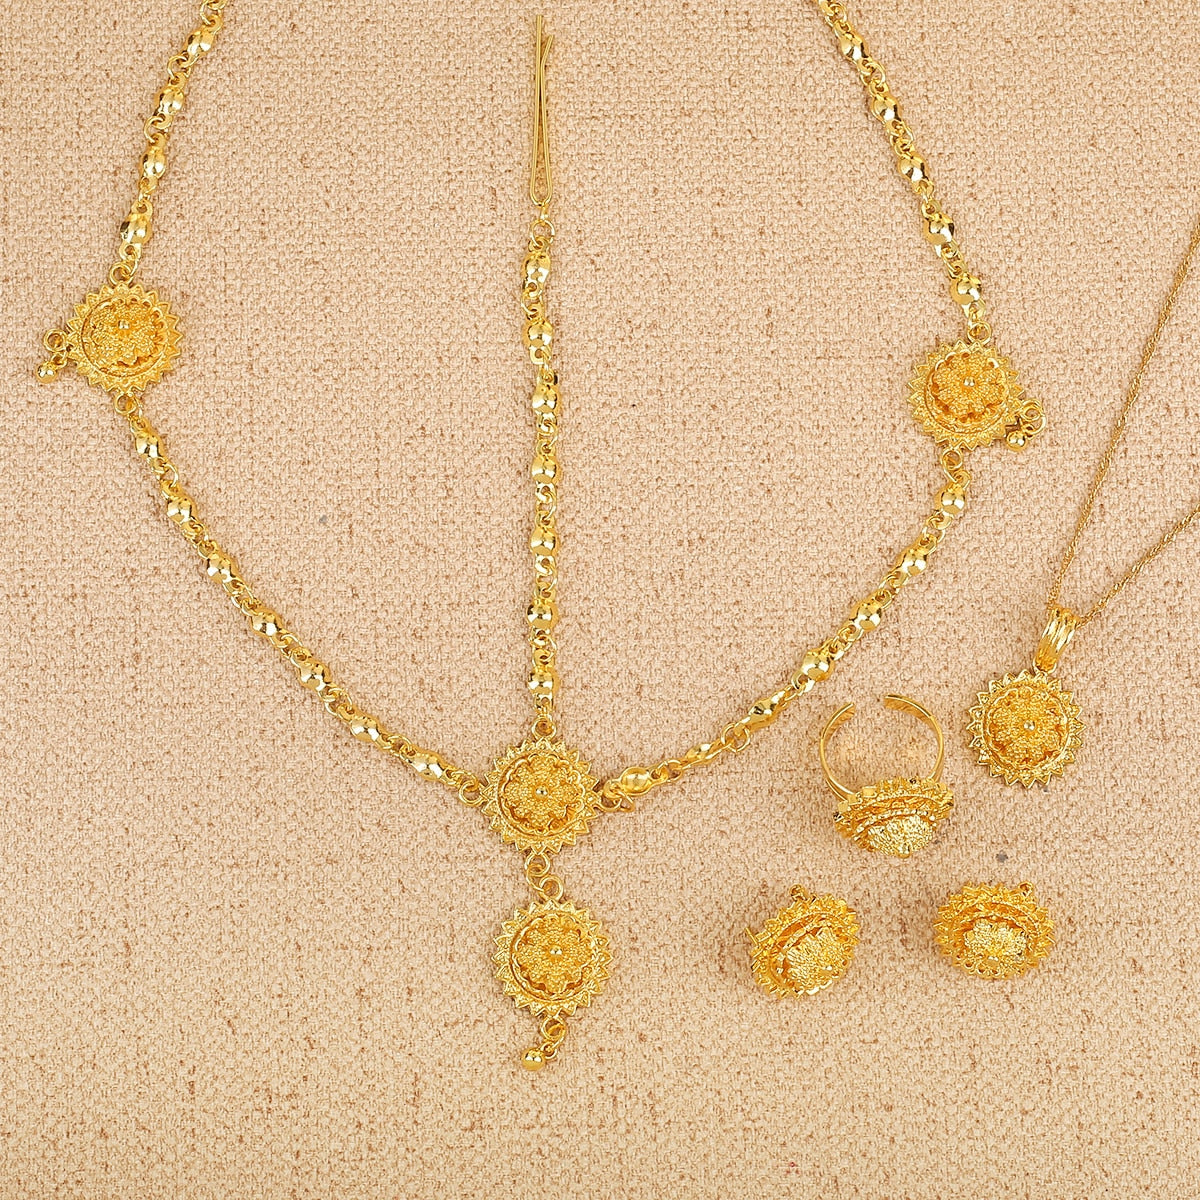 Gold Color For African Ethiopian Eritrean Habesha Jewelry Sets